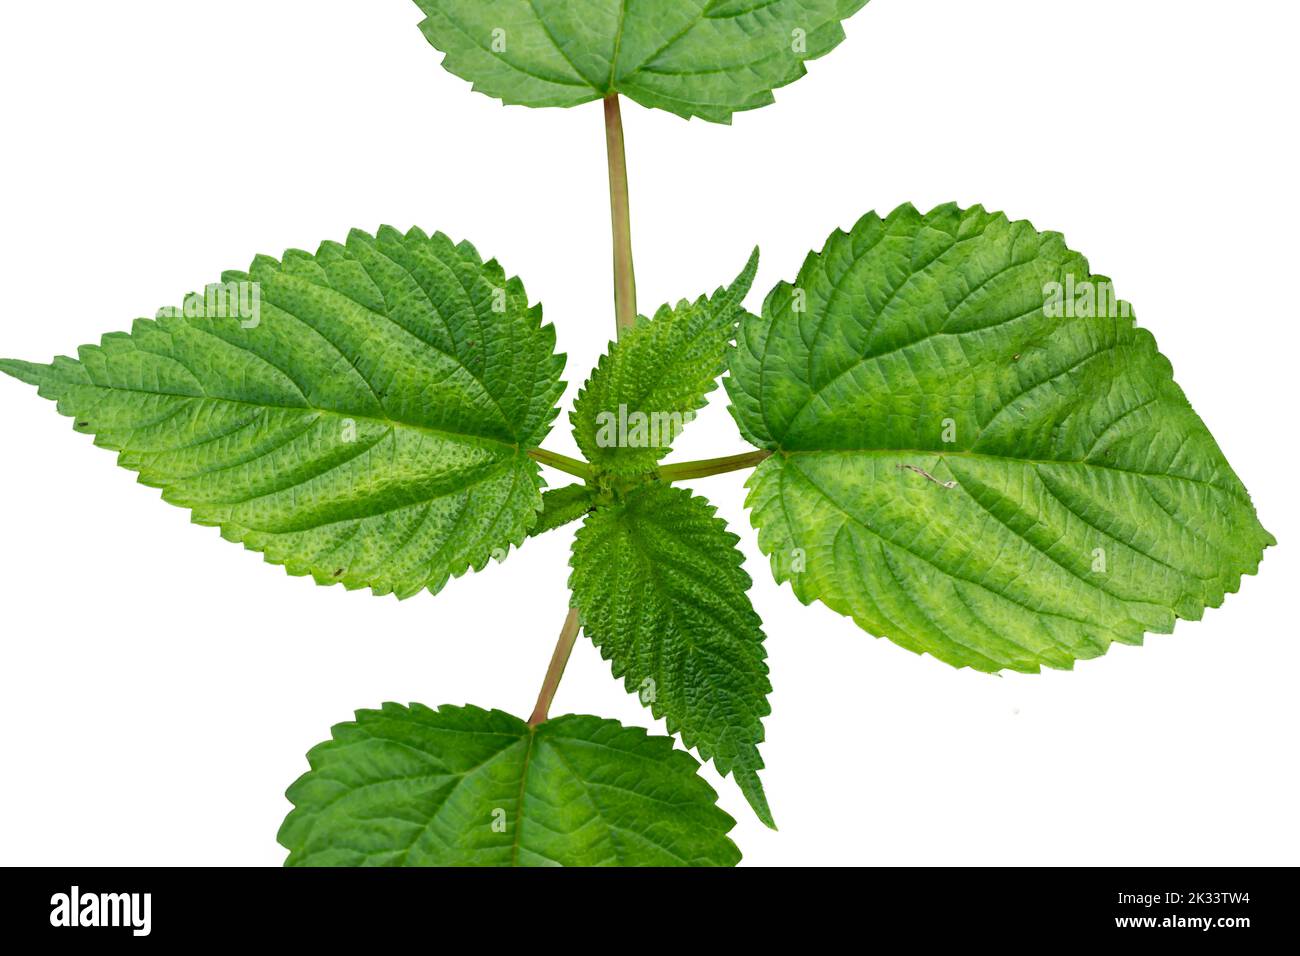 Top view of the top of a laportea plant with green heart-shaped leaves with a detailed leaf frame, isolated on a white background Stock Photo